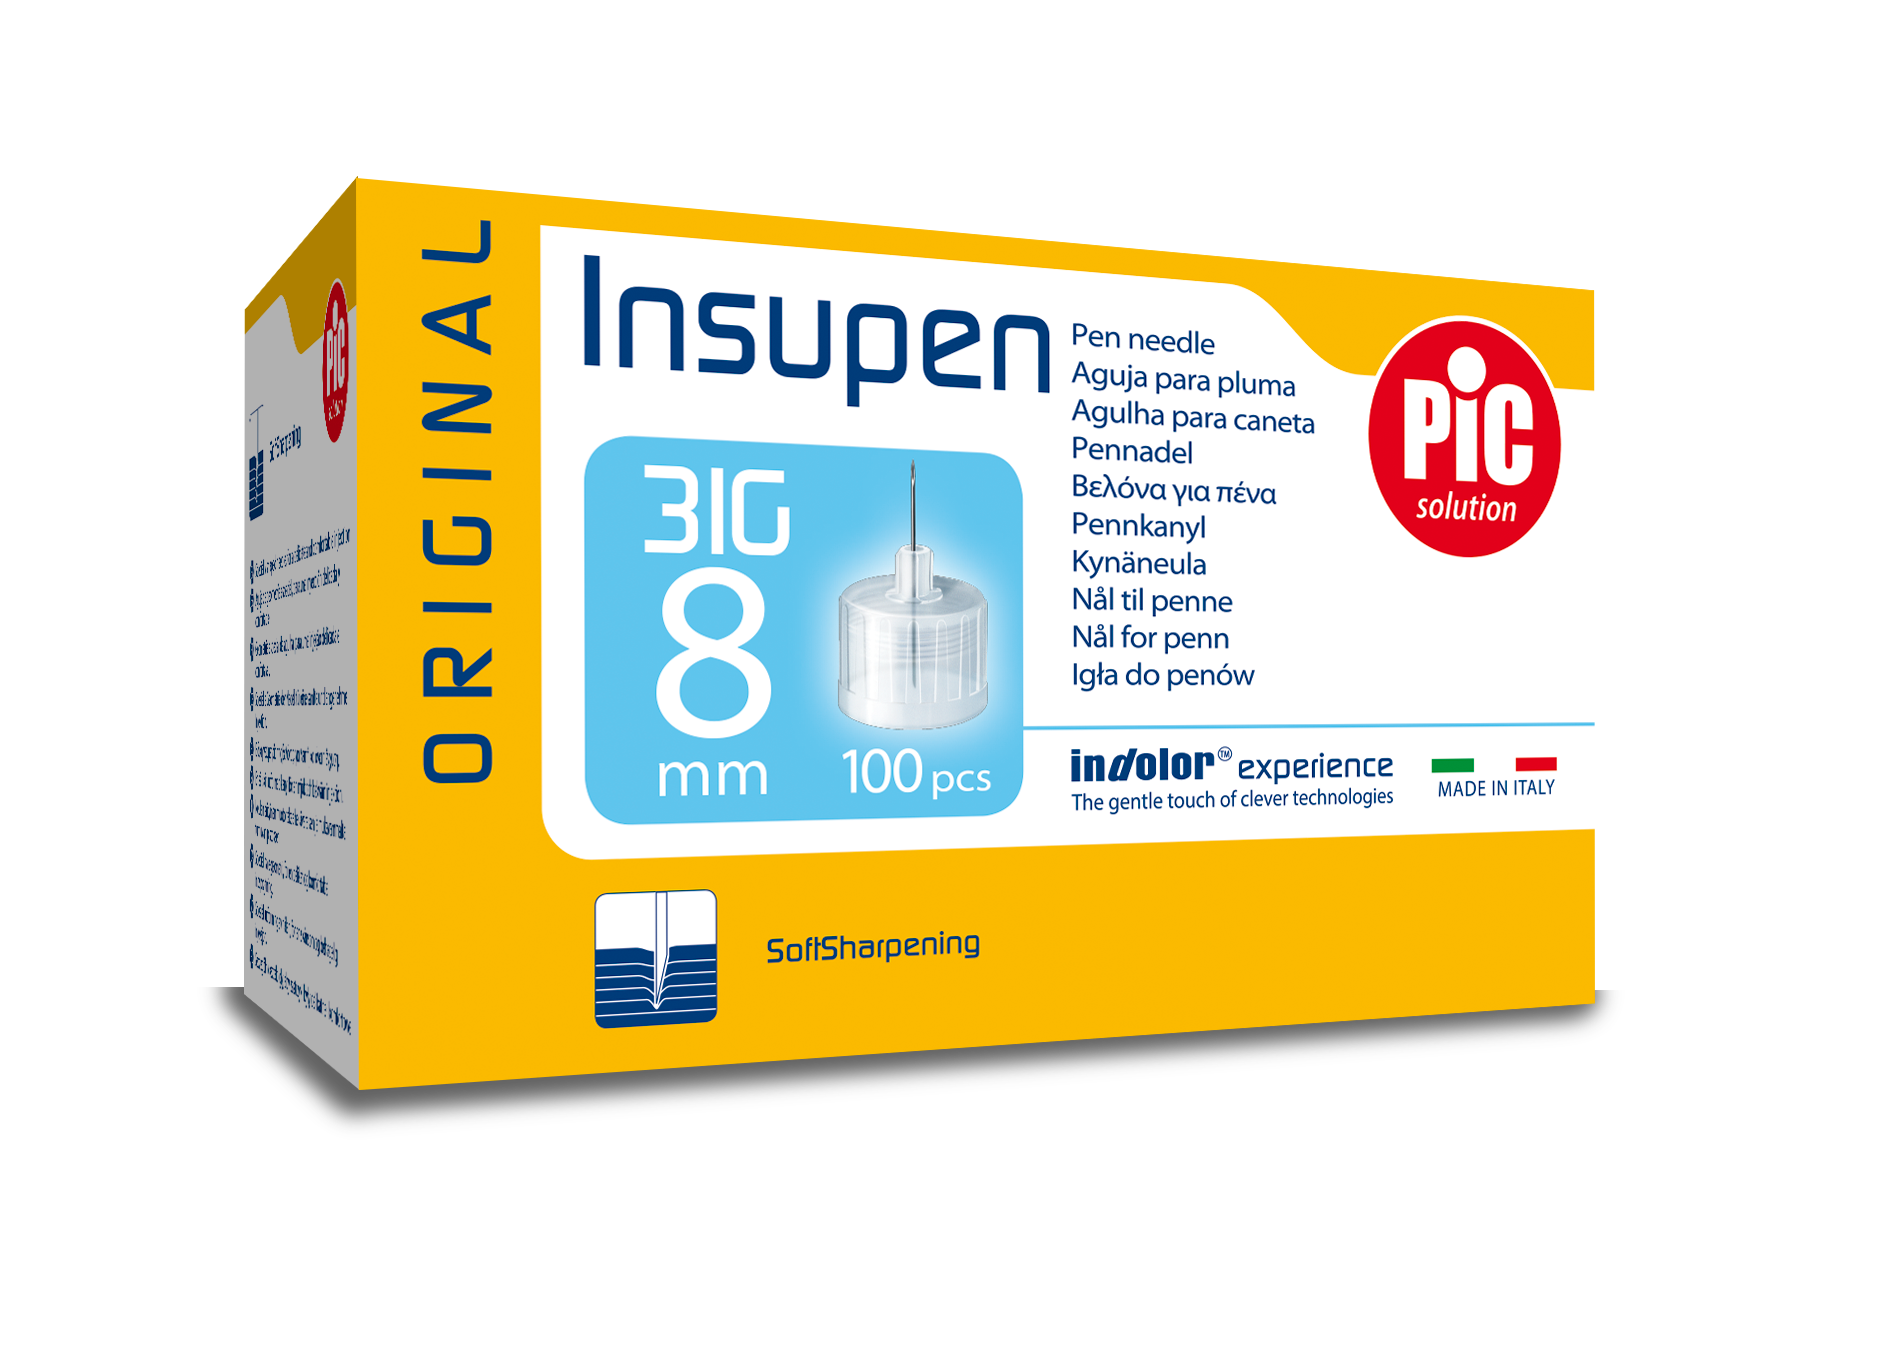 Ace insulina 31g x 8mm insupen pic solution